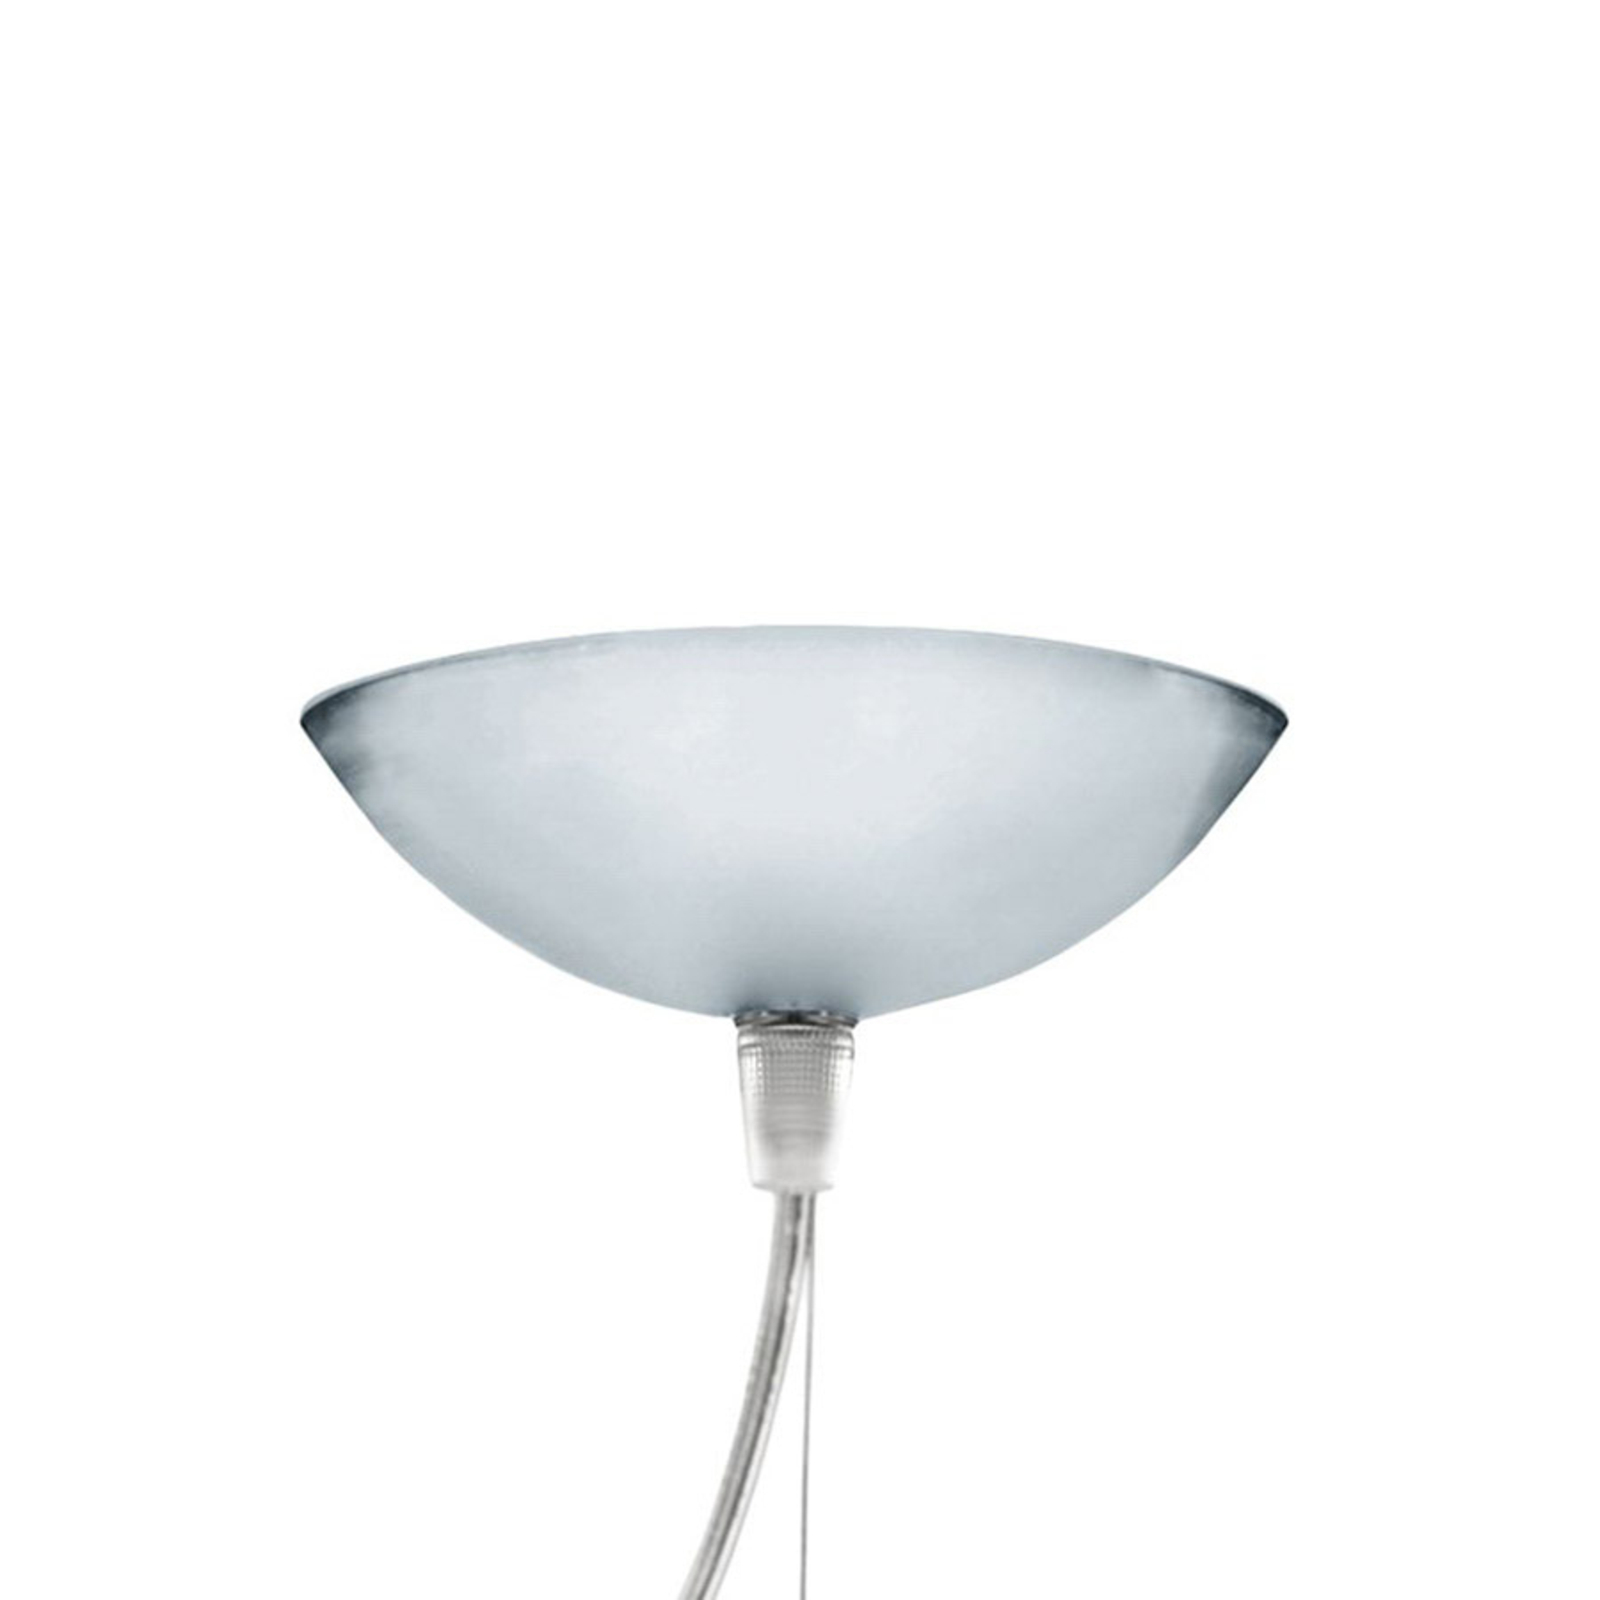 Kartell Small FL/Y LED hanglamp wit glanzend